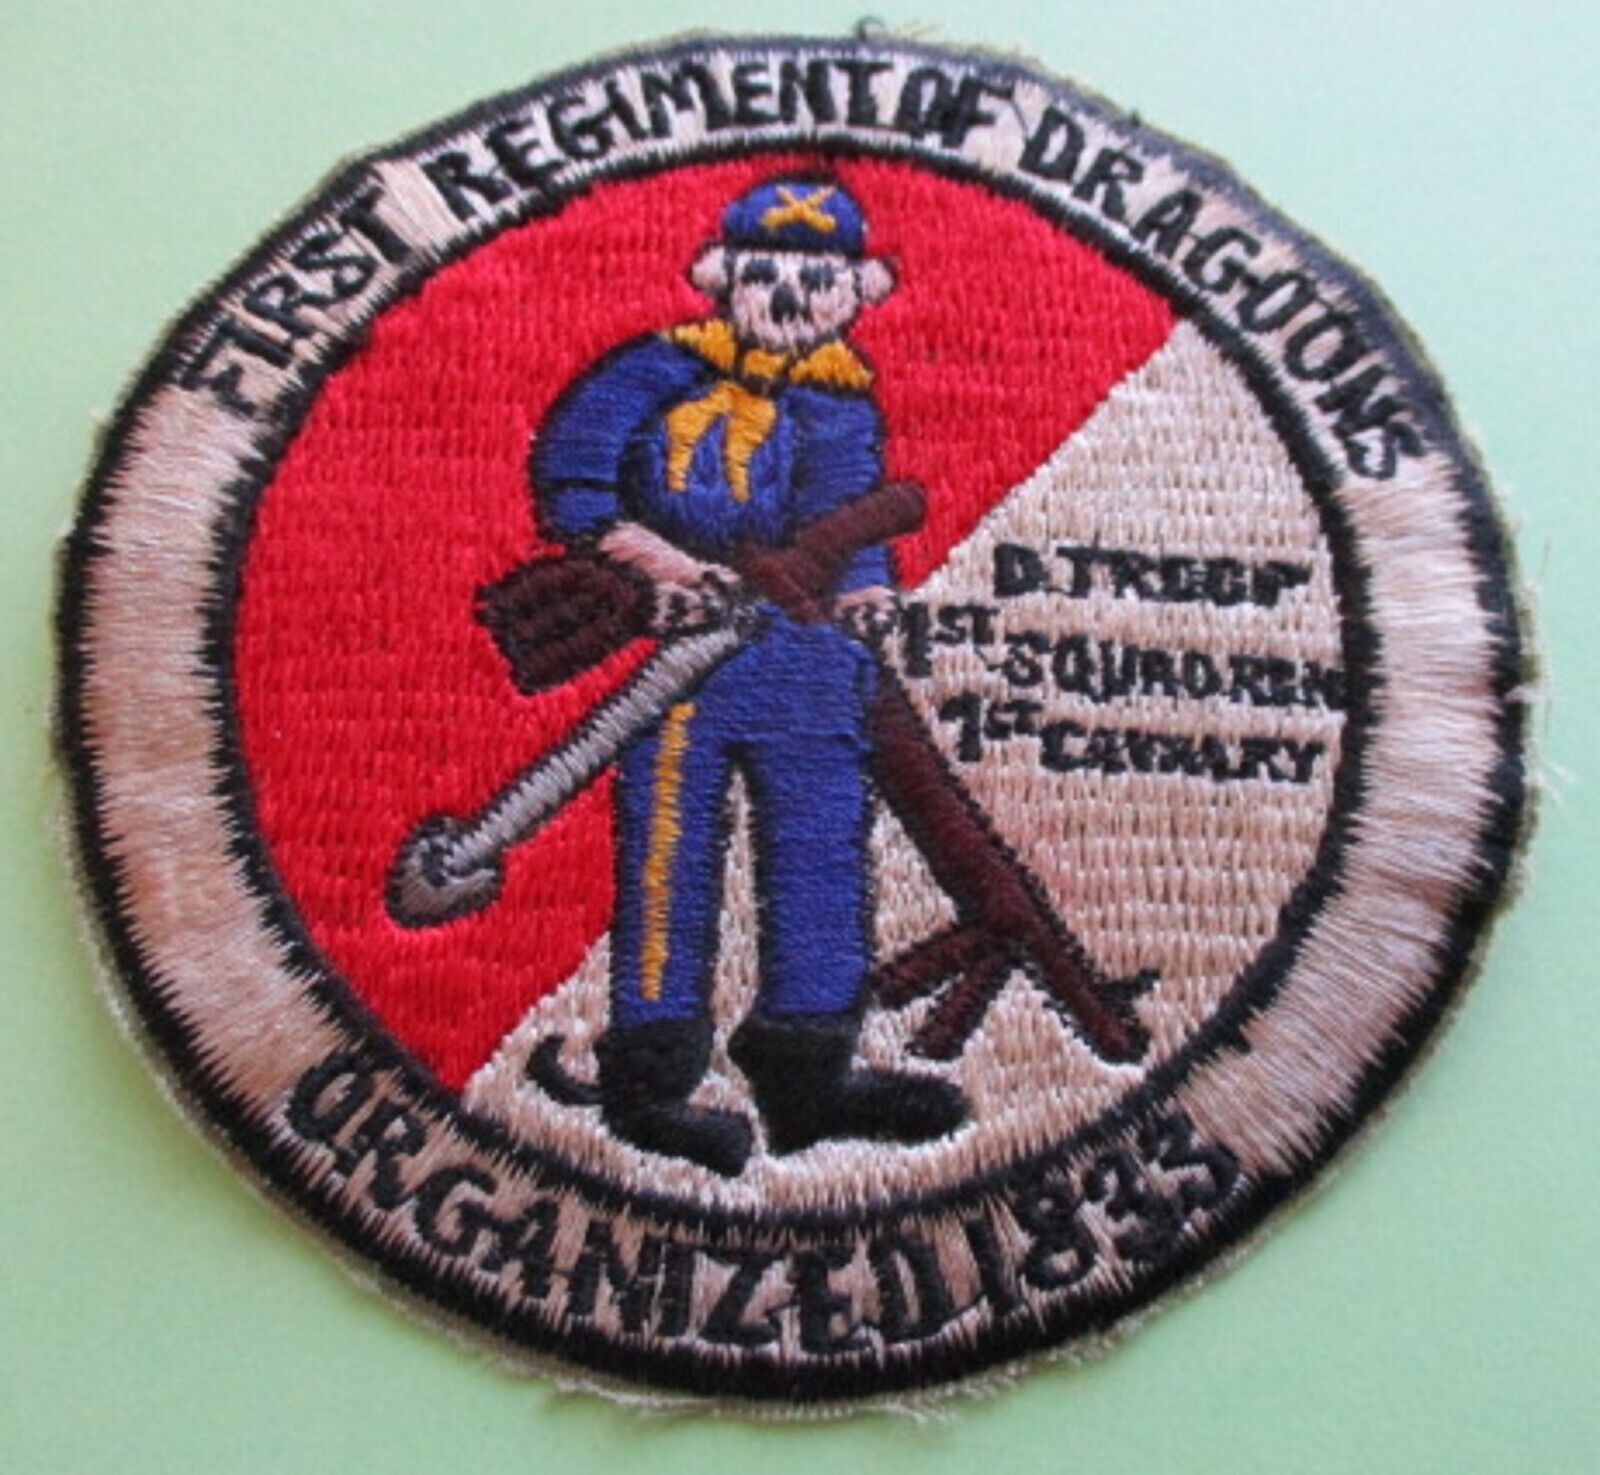 1st REGIMENT OF DRAGOONS DELTA TROOP US 1st CAVALRY FOUNDED 1833 VIETNAM PATCH